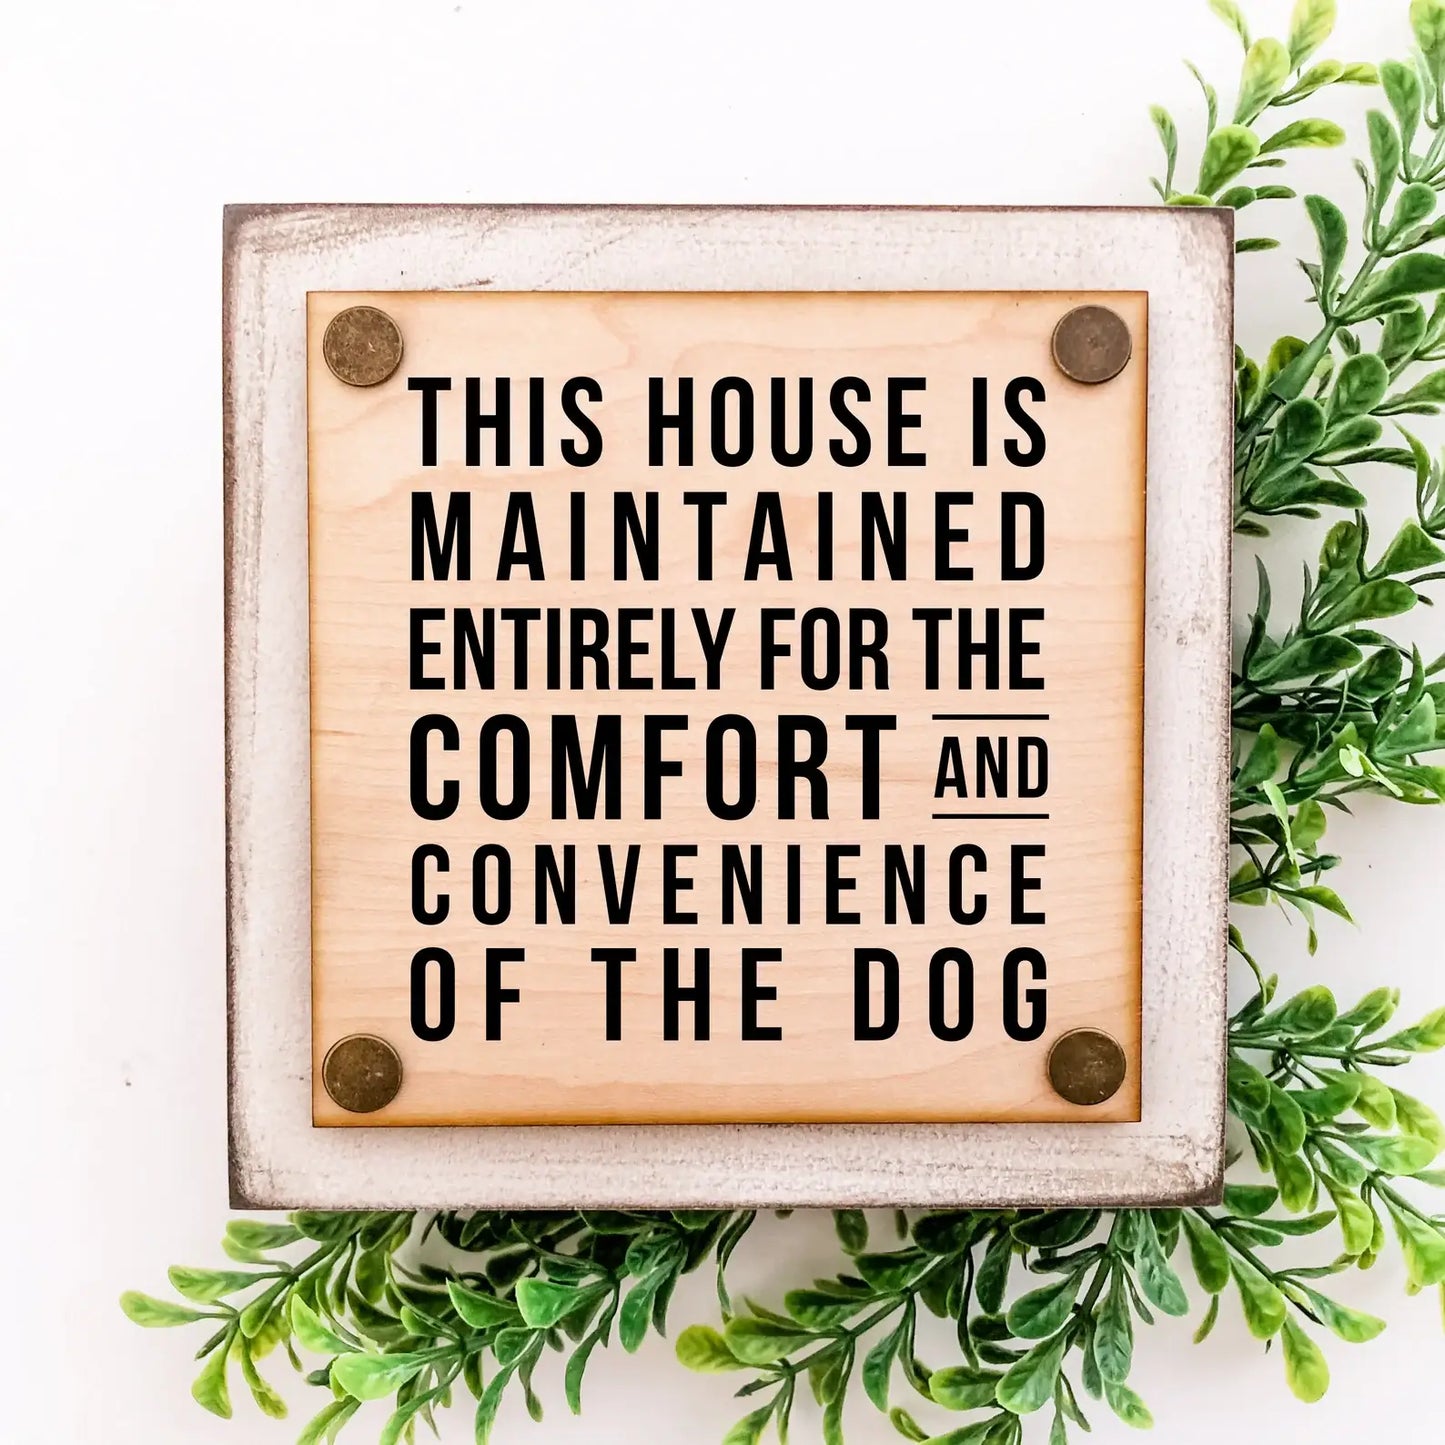 Funny Pet Sign Mini Block: "Of the Dogs"